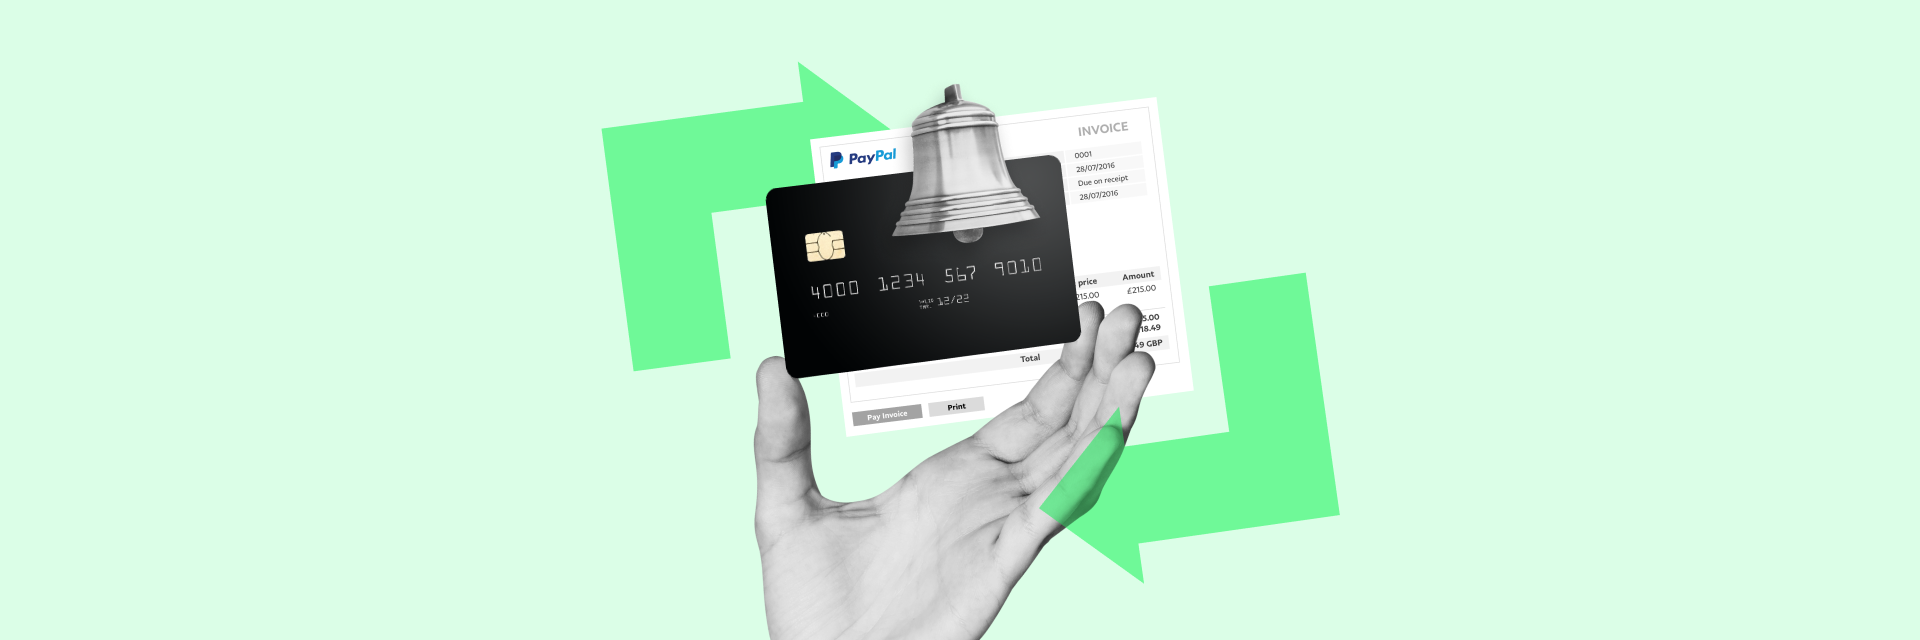 PayPal Introduces Pre-Chargeback Alerts